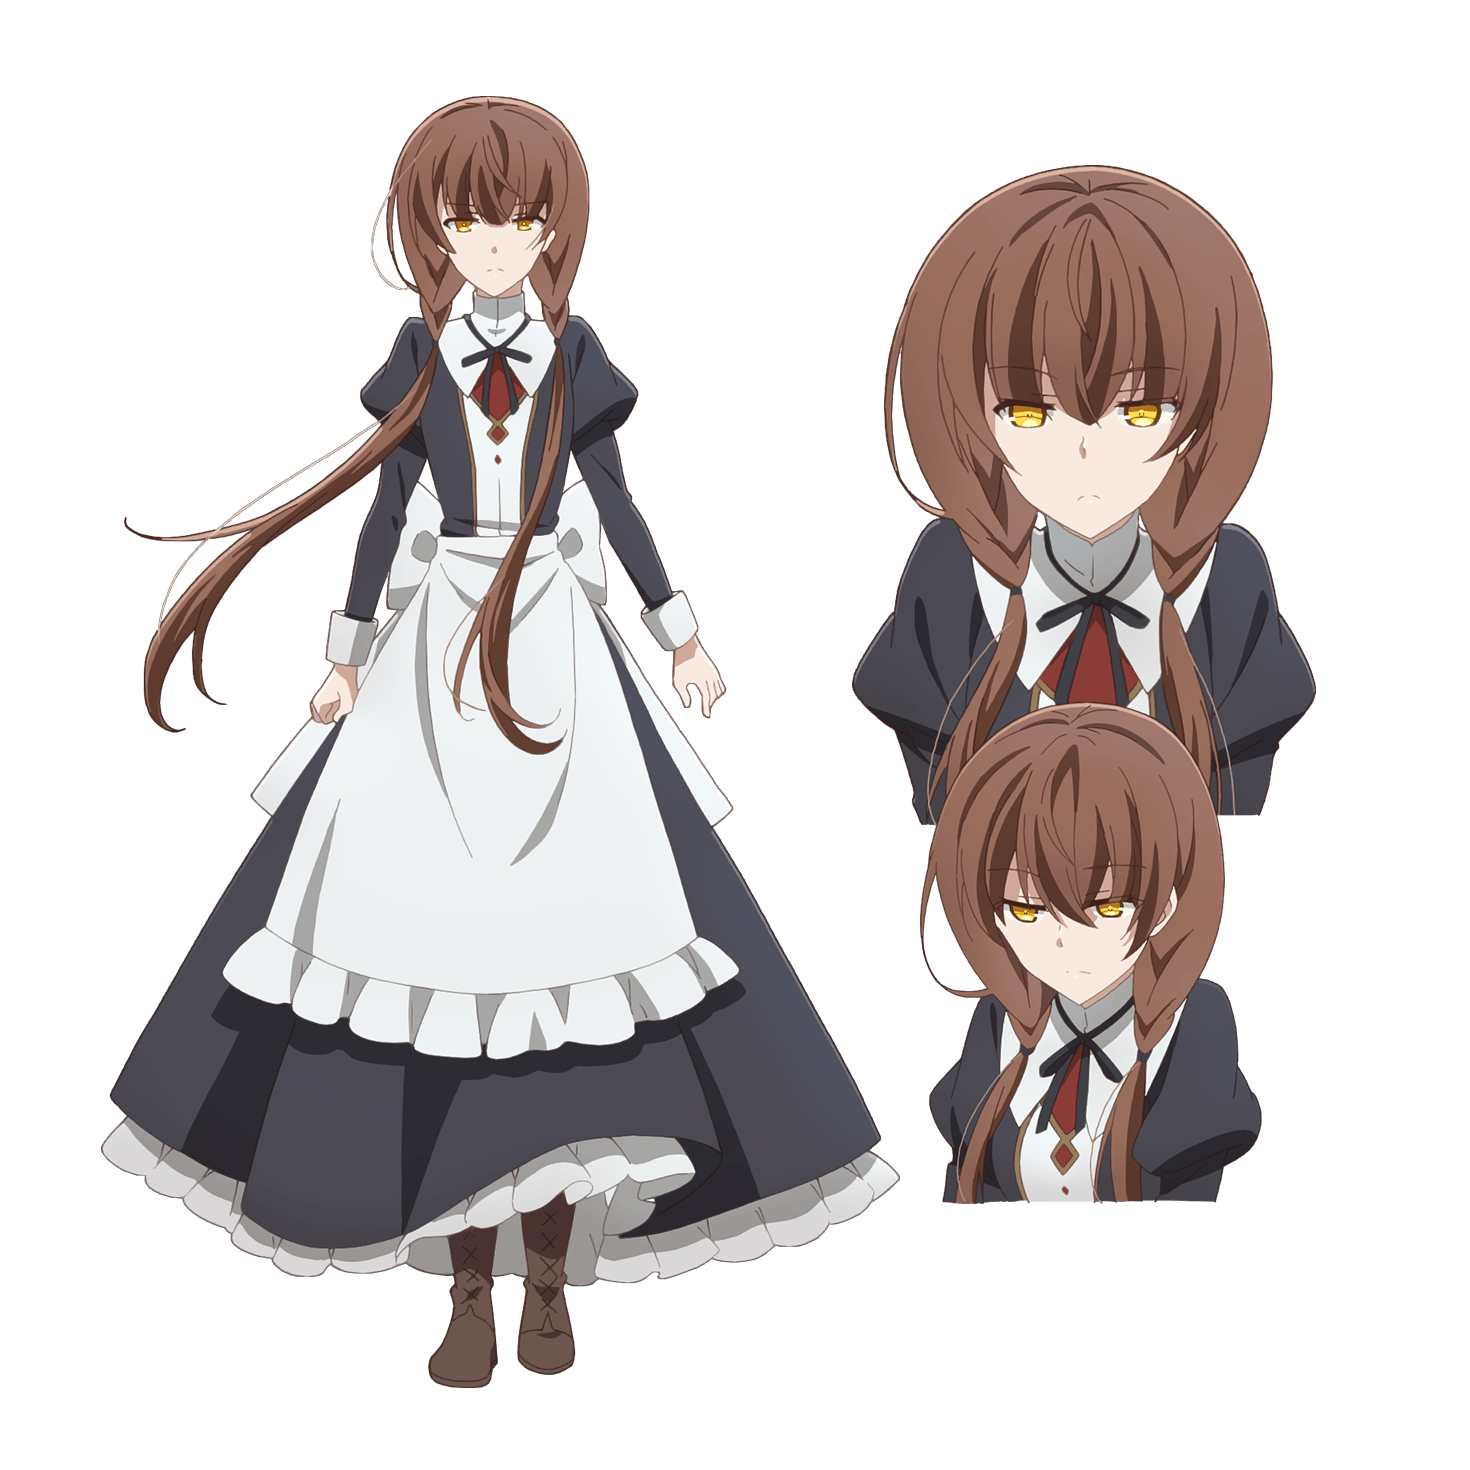 Maid of the Day — Today's Maid of the Day: Rin Vispose from Kimi to